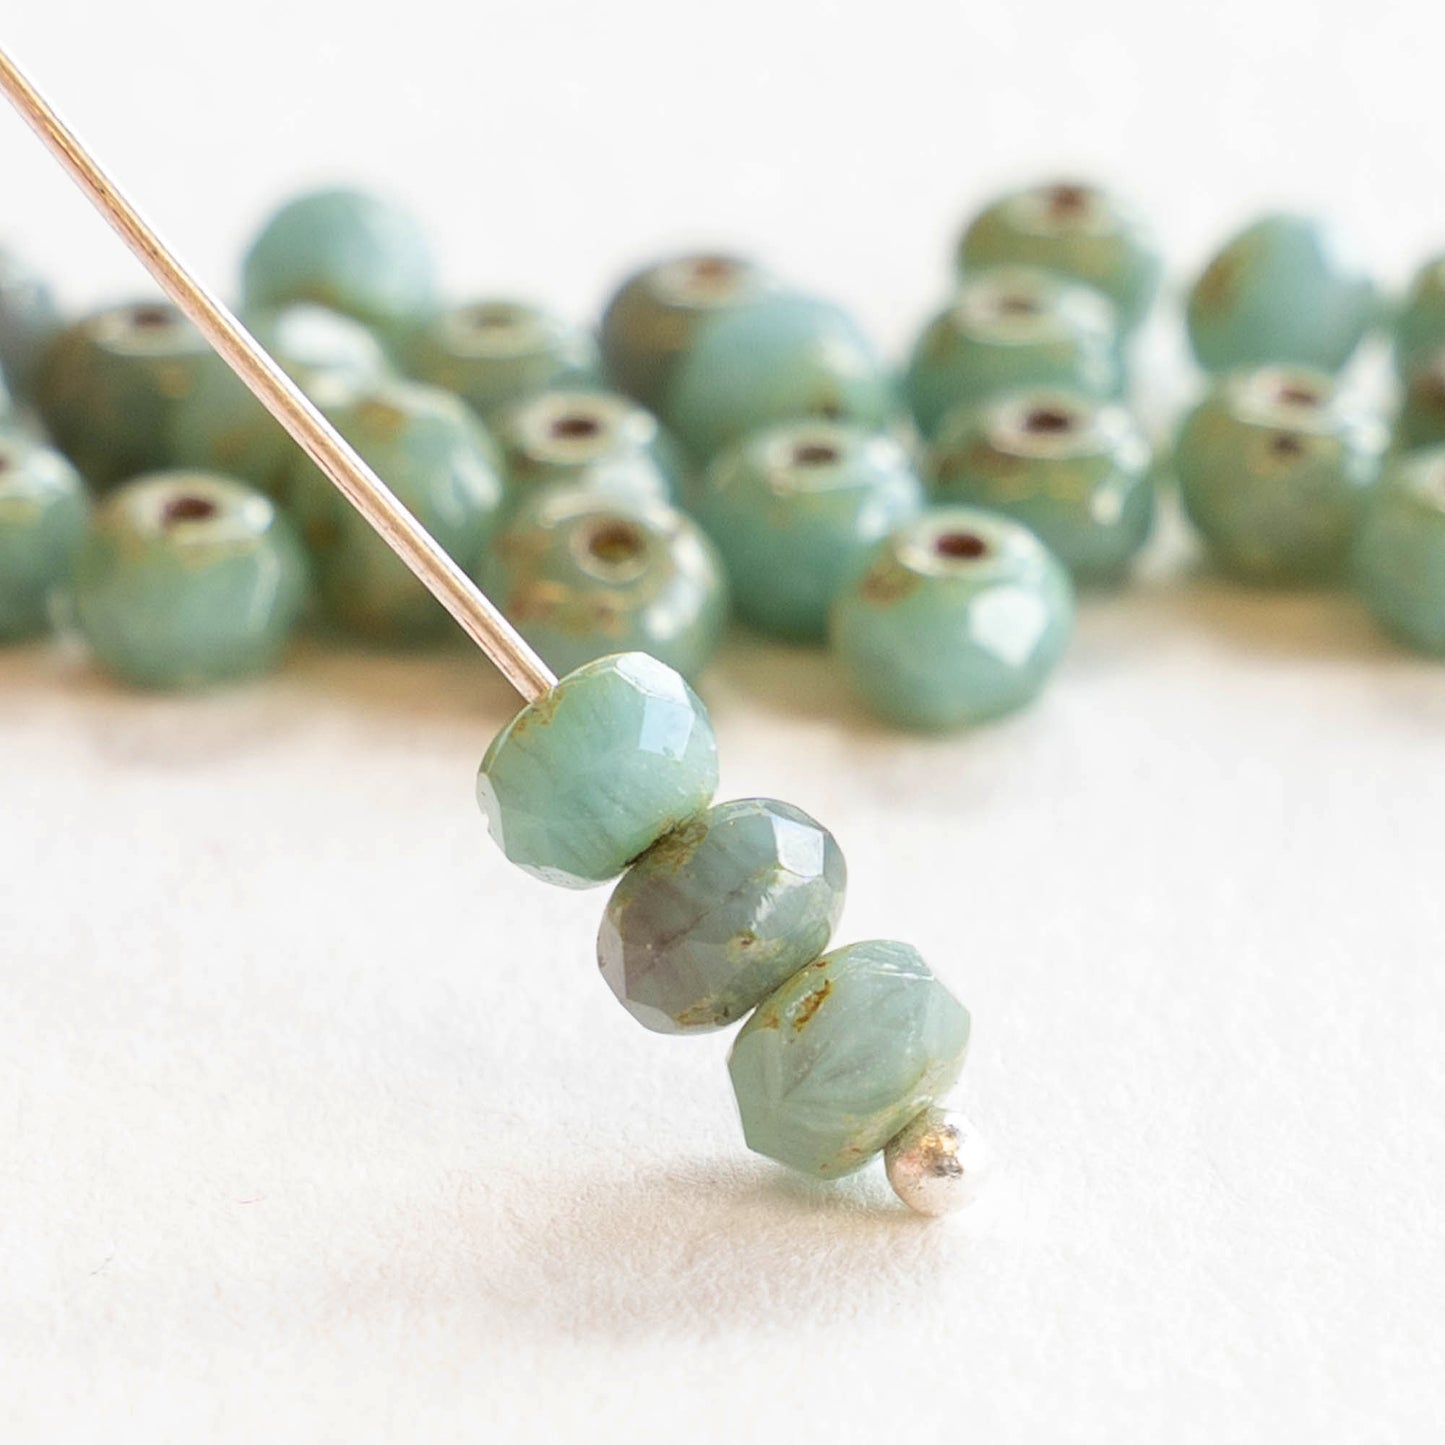 3x5mm Rondelle Beads - Sage Picassso - 30 beads